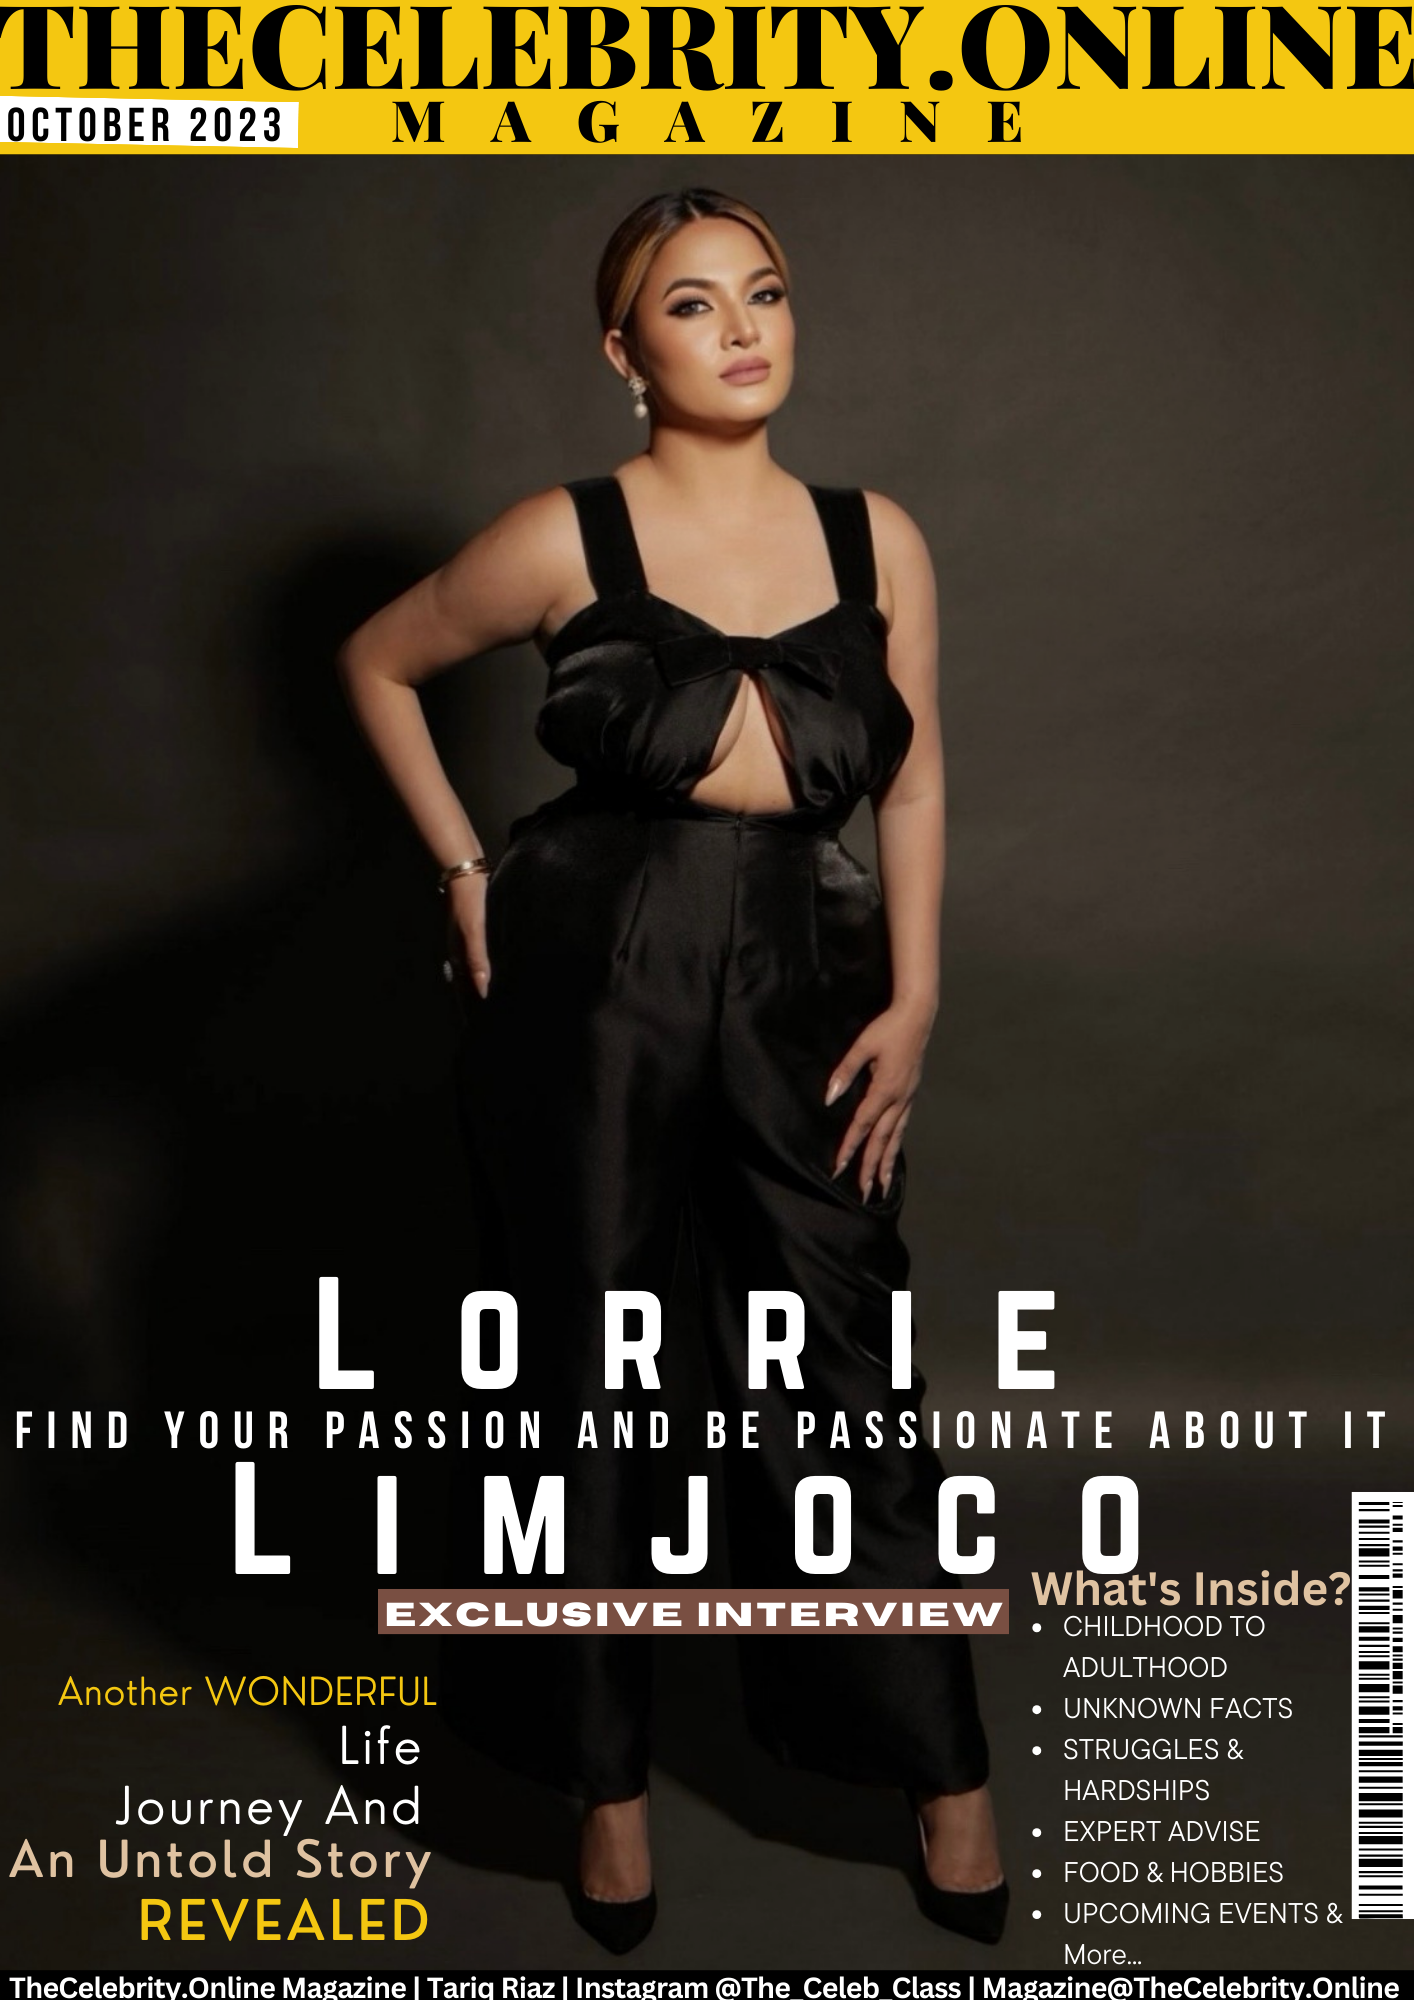 Lorrie Limjoco of Maximus Global Innovation – Exclusive Interview